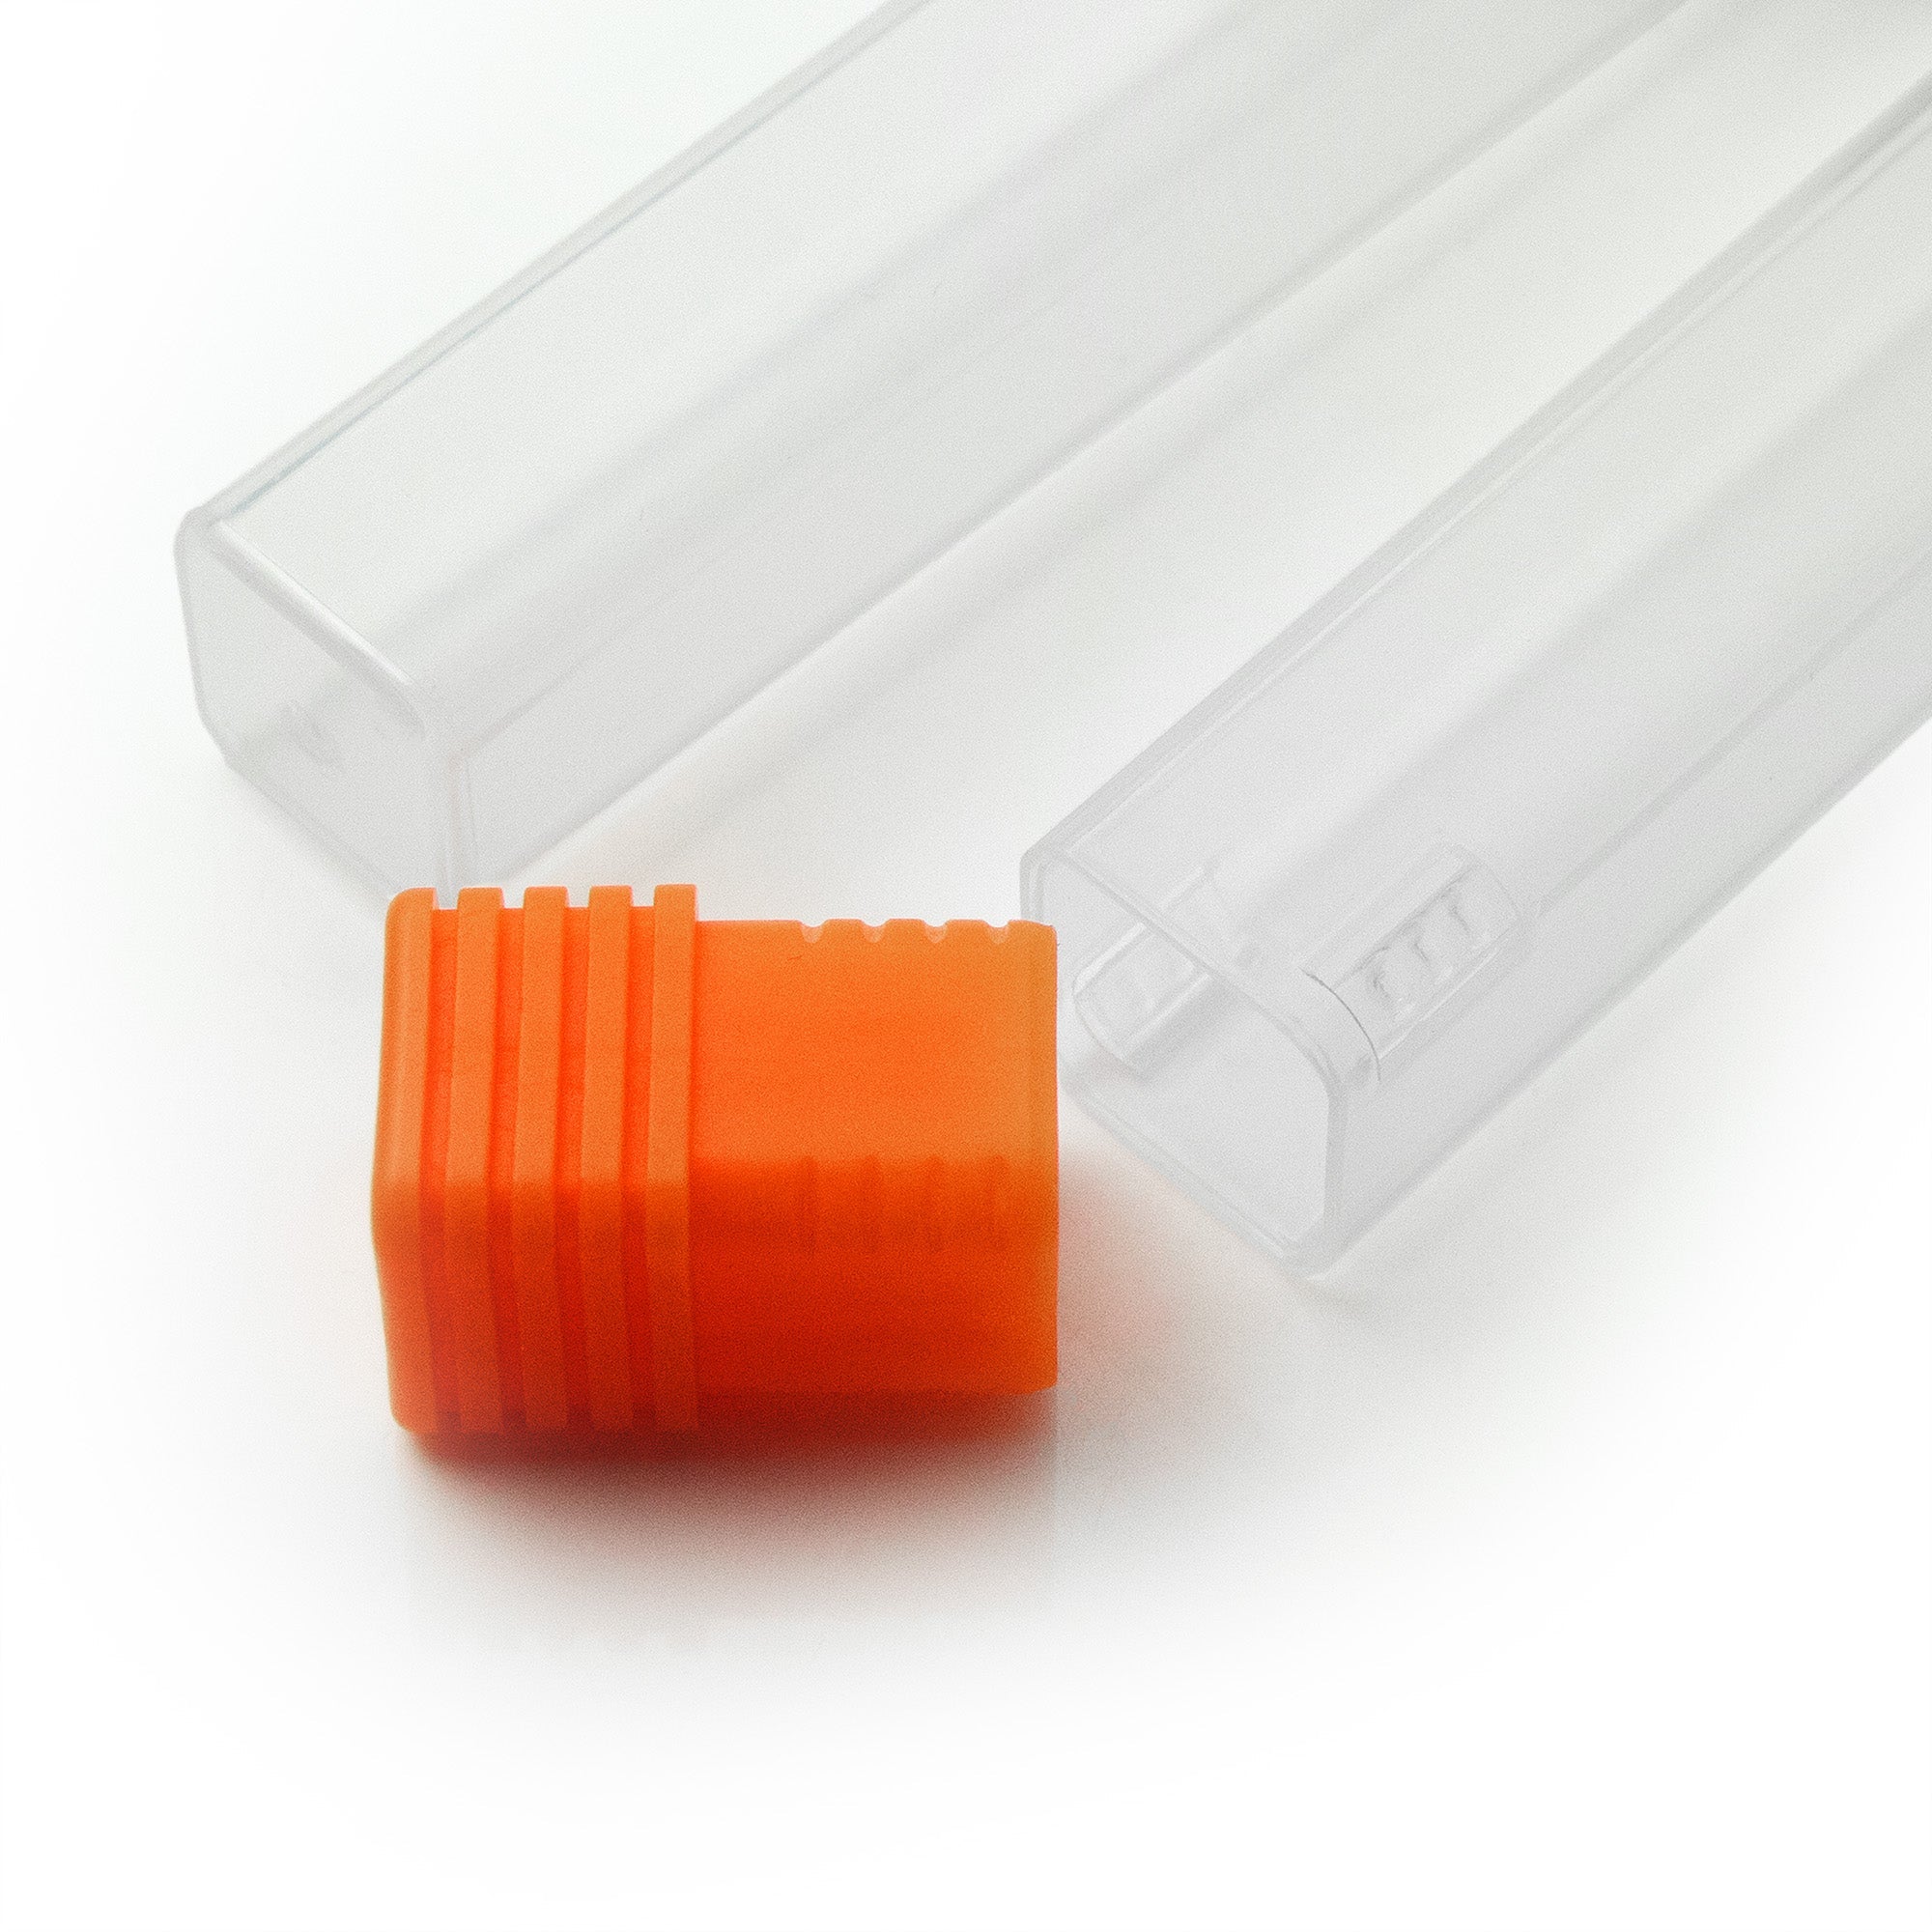 Compact Orange Cap Clear Square Bottle/ Container for Watch tools or Components, Set of Two Strapcode watch bands